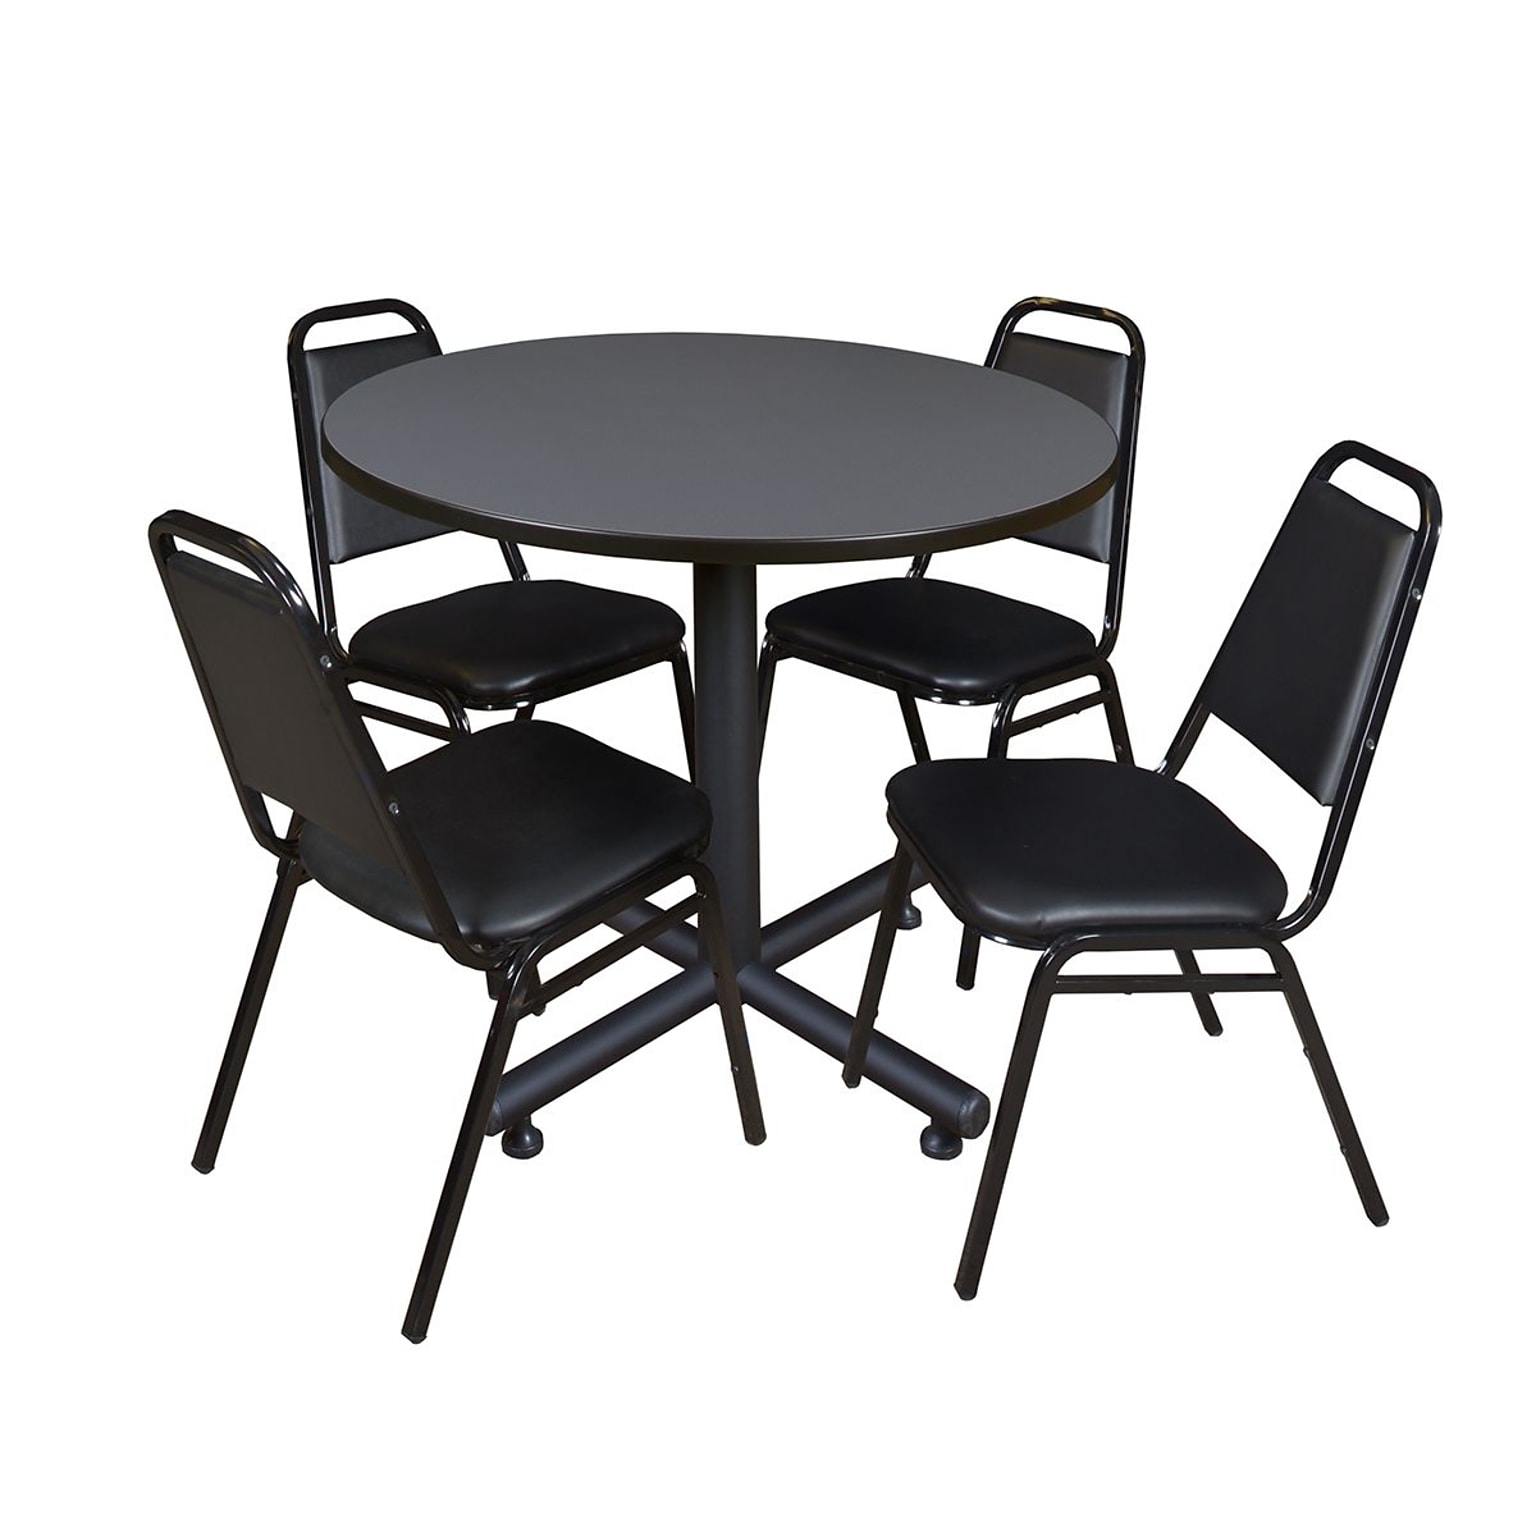 Regency 42-inch Round Laminate Room Tables With 4 Stack Chairs, Gray (TKB42RNDGY29)